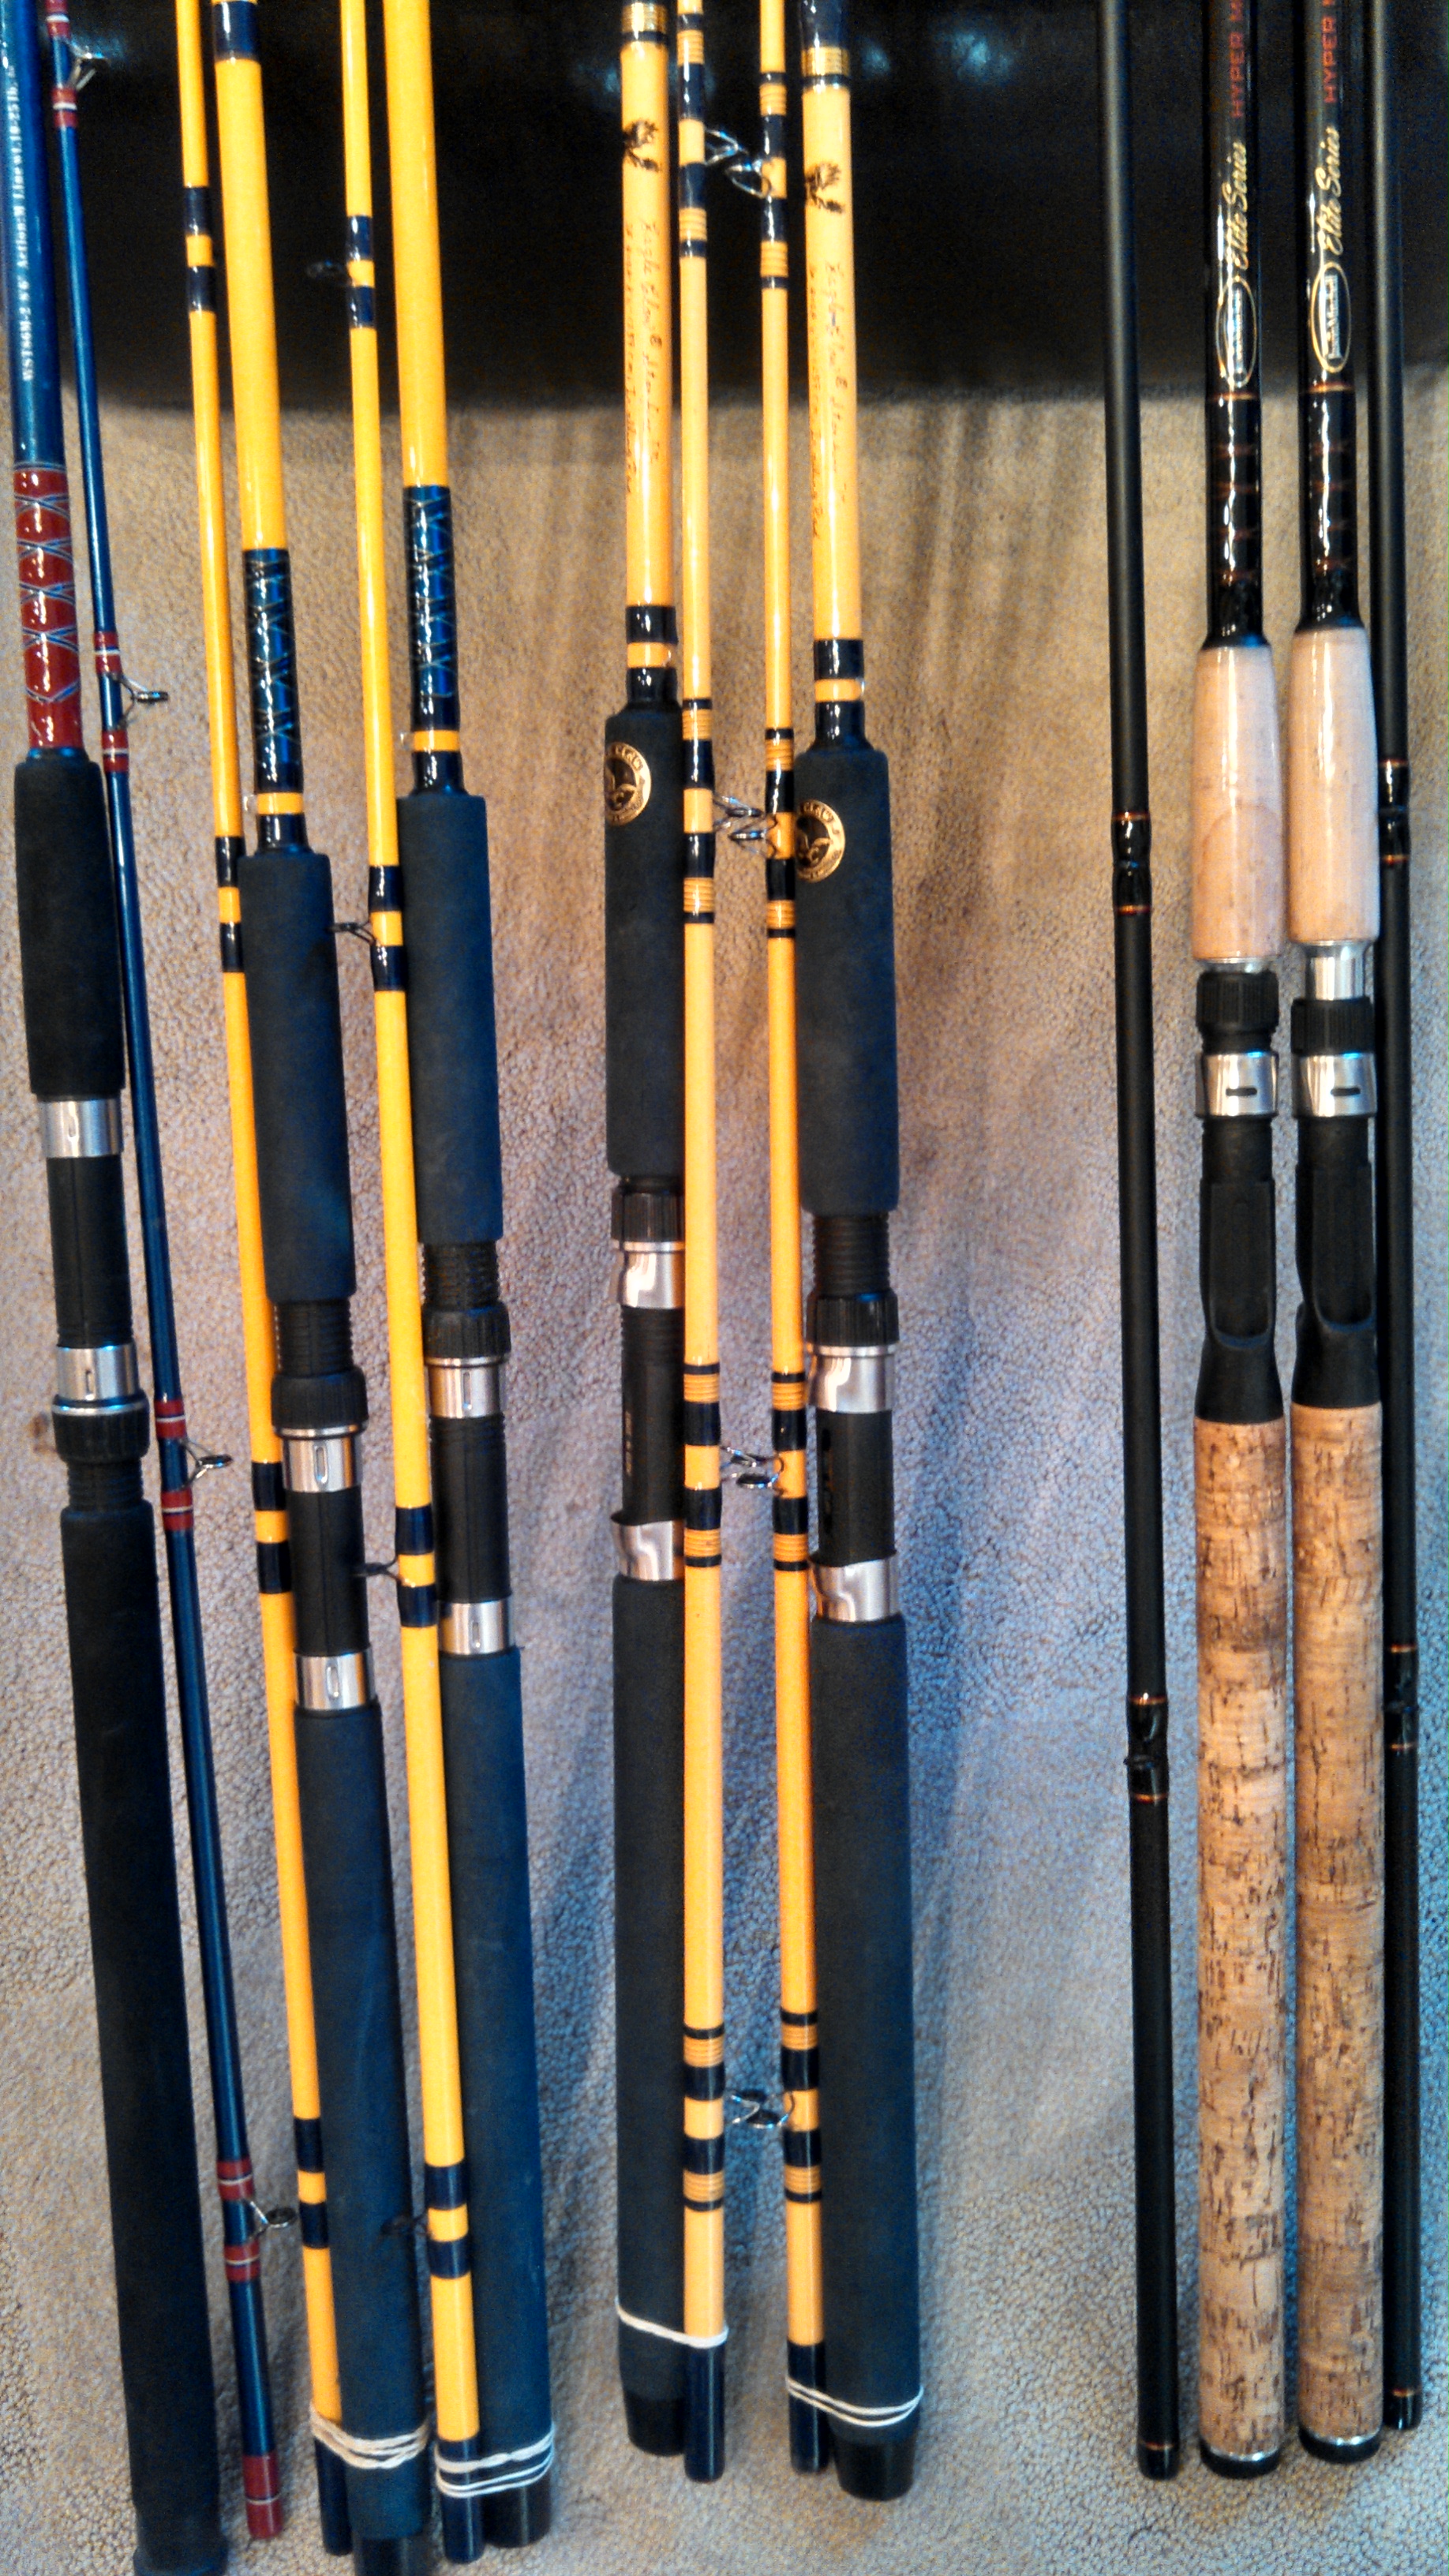 Trolling Rods For Sale - Classified Ads - Classified Ads